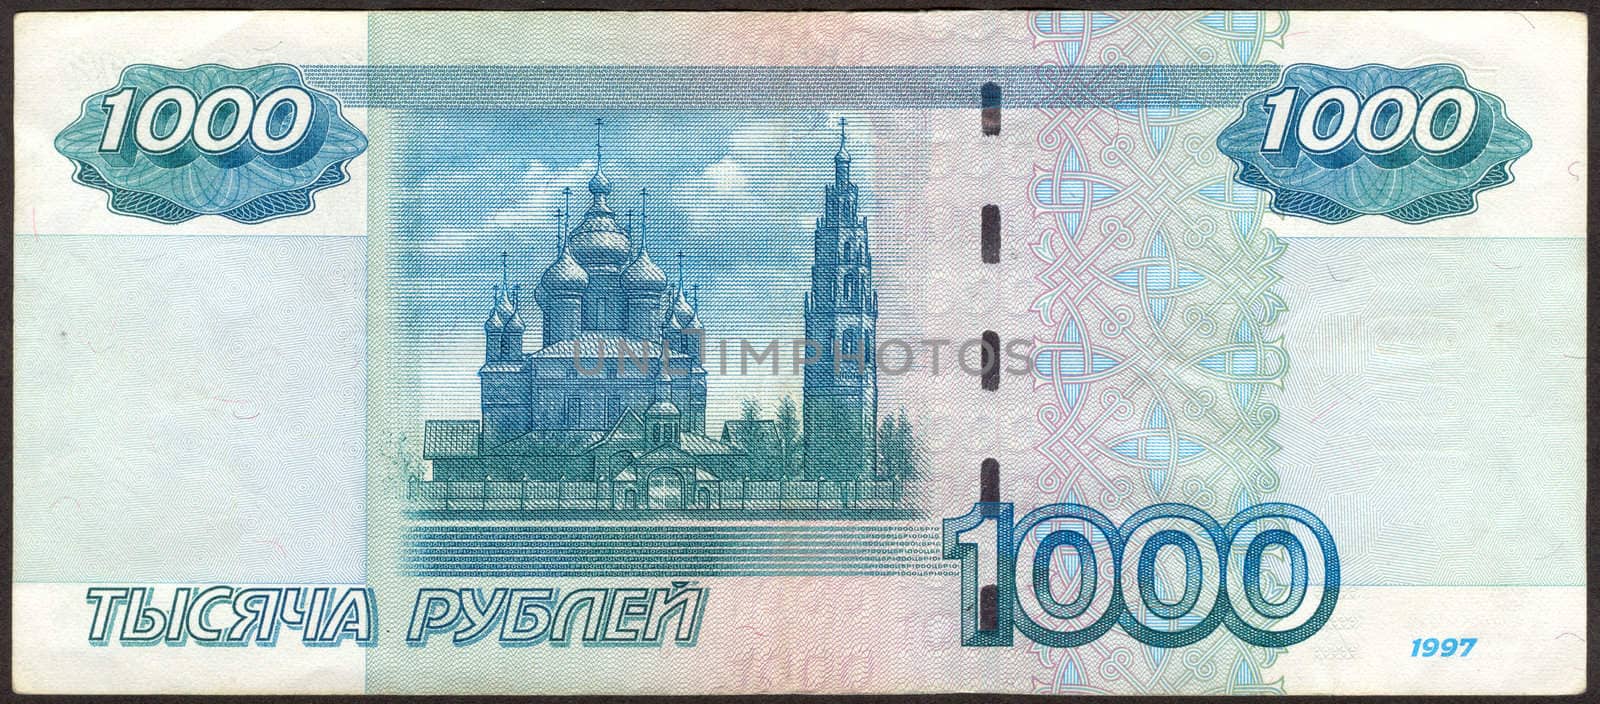 The scanned image of Russian money. One thousand are made in 1997.